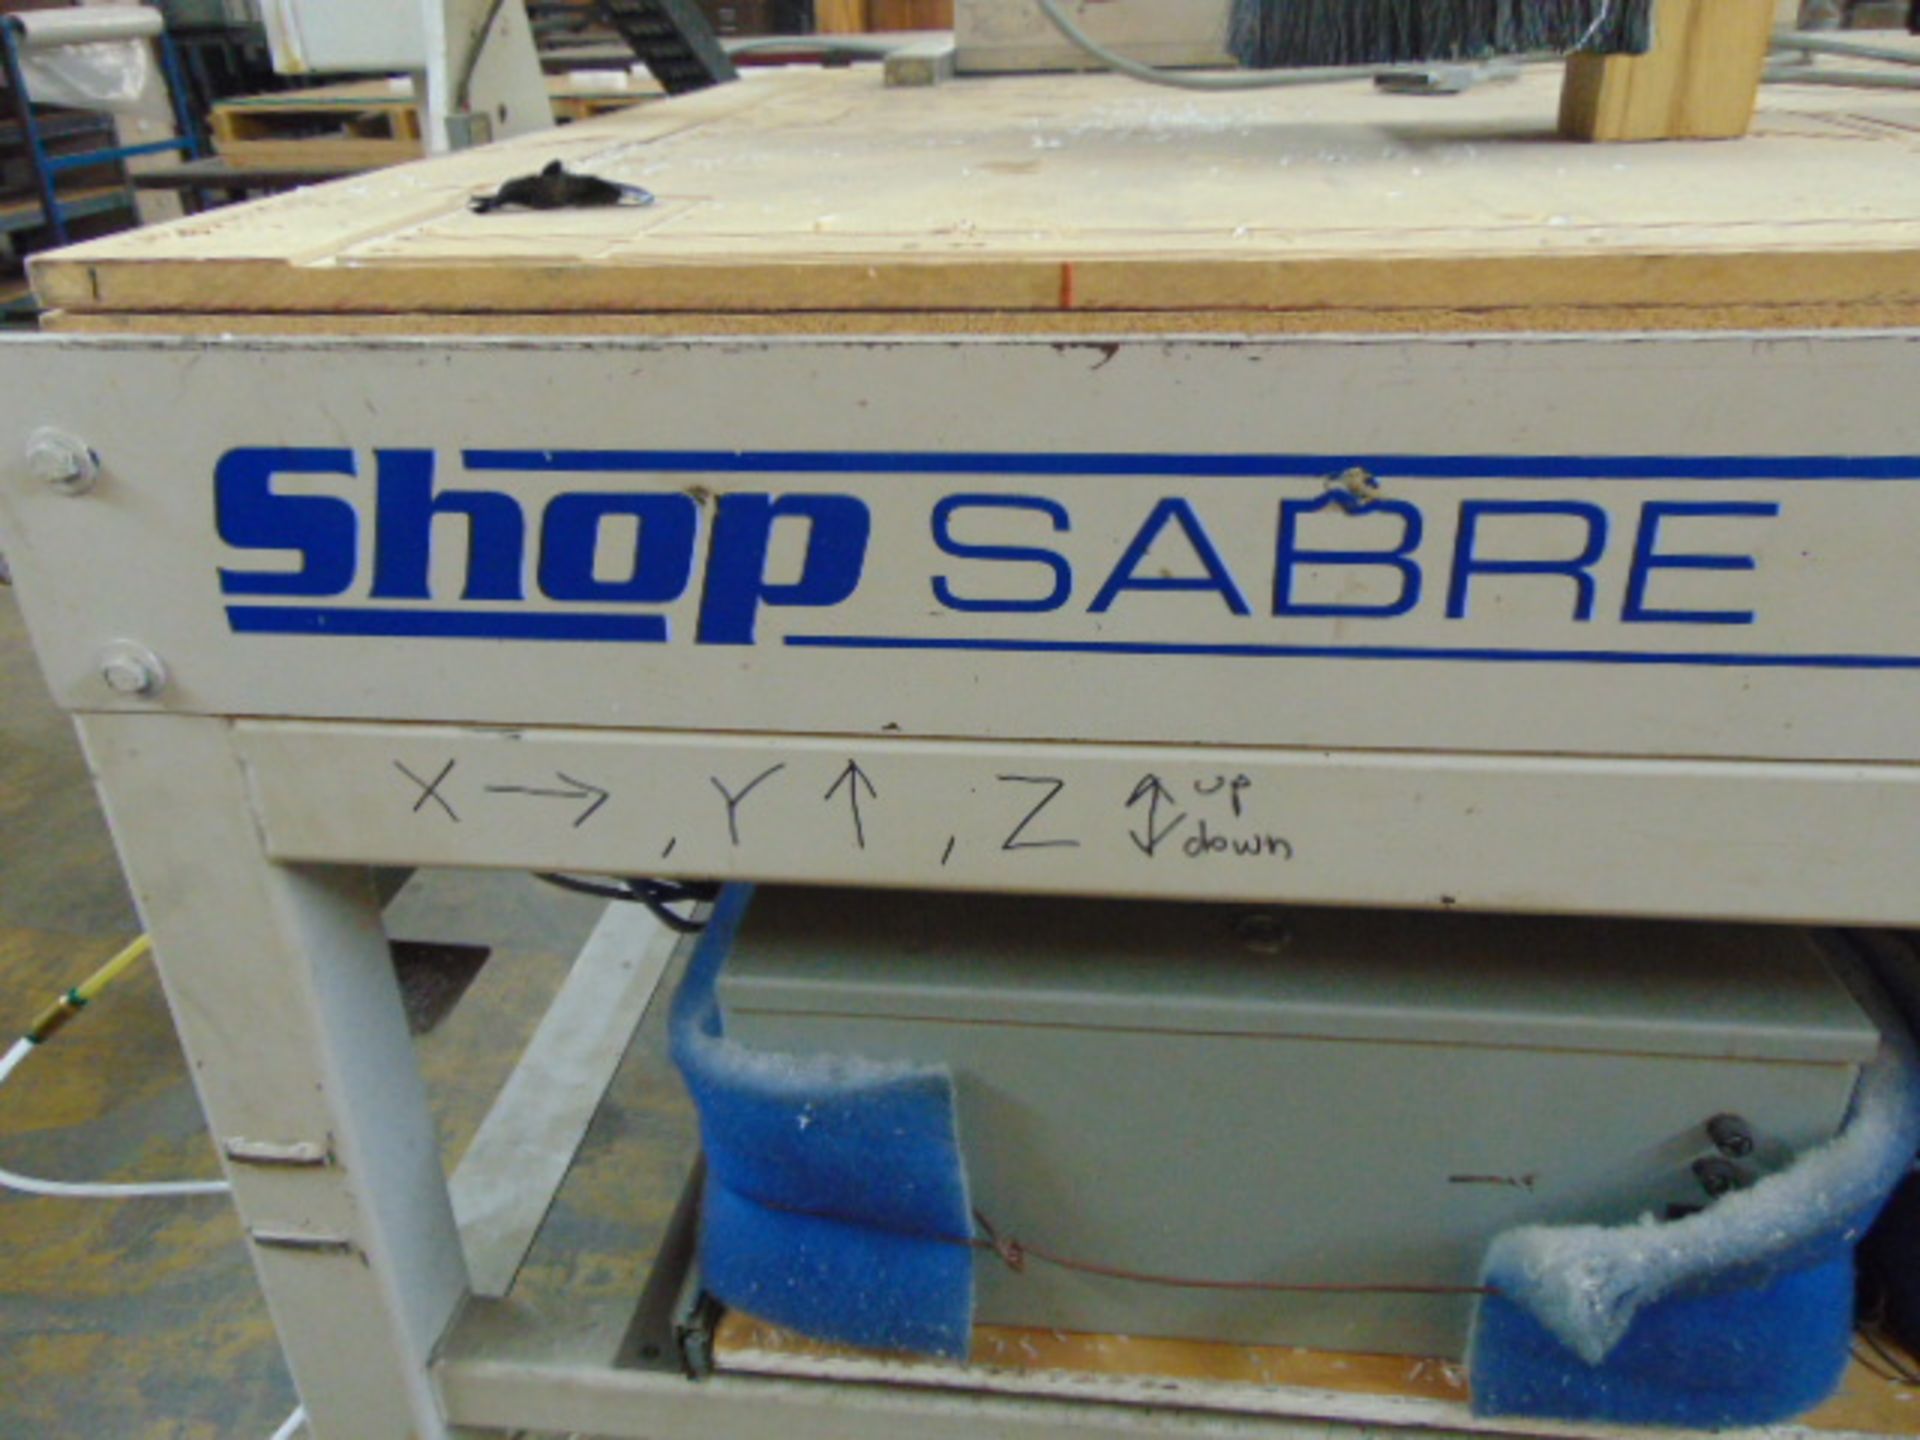 PROGRAMMABLE ROUTER TABLE, SHOP SABRE MDL. 4860 (no computer) - Image 4 of 6